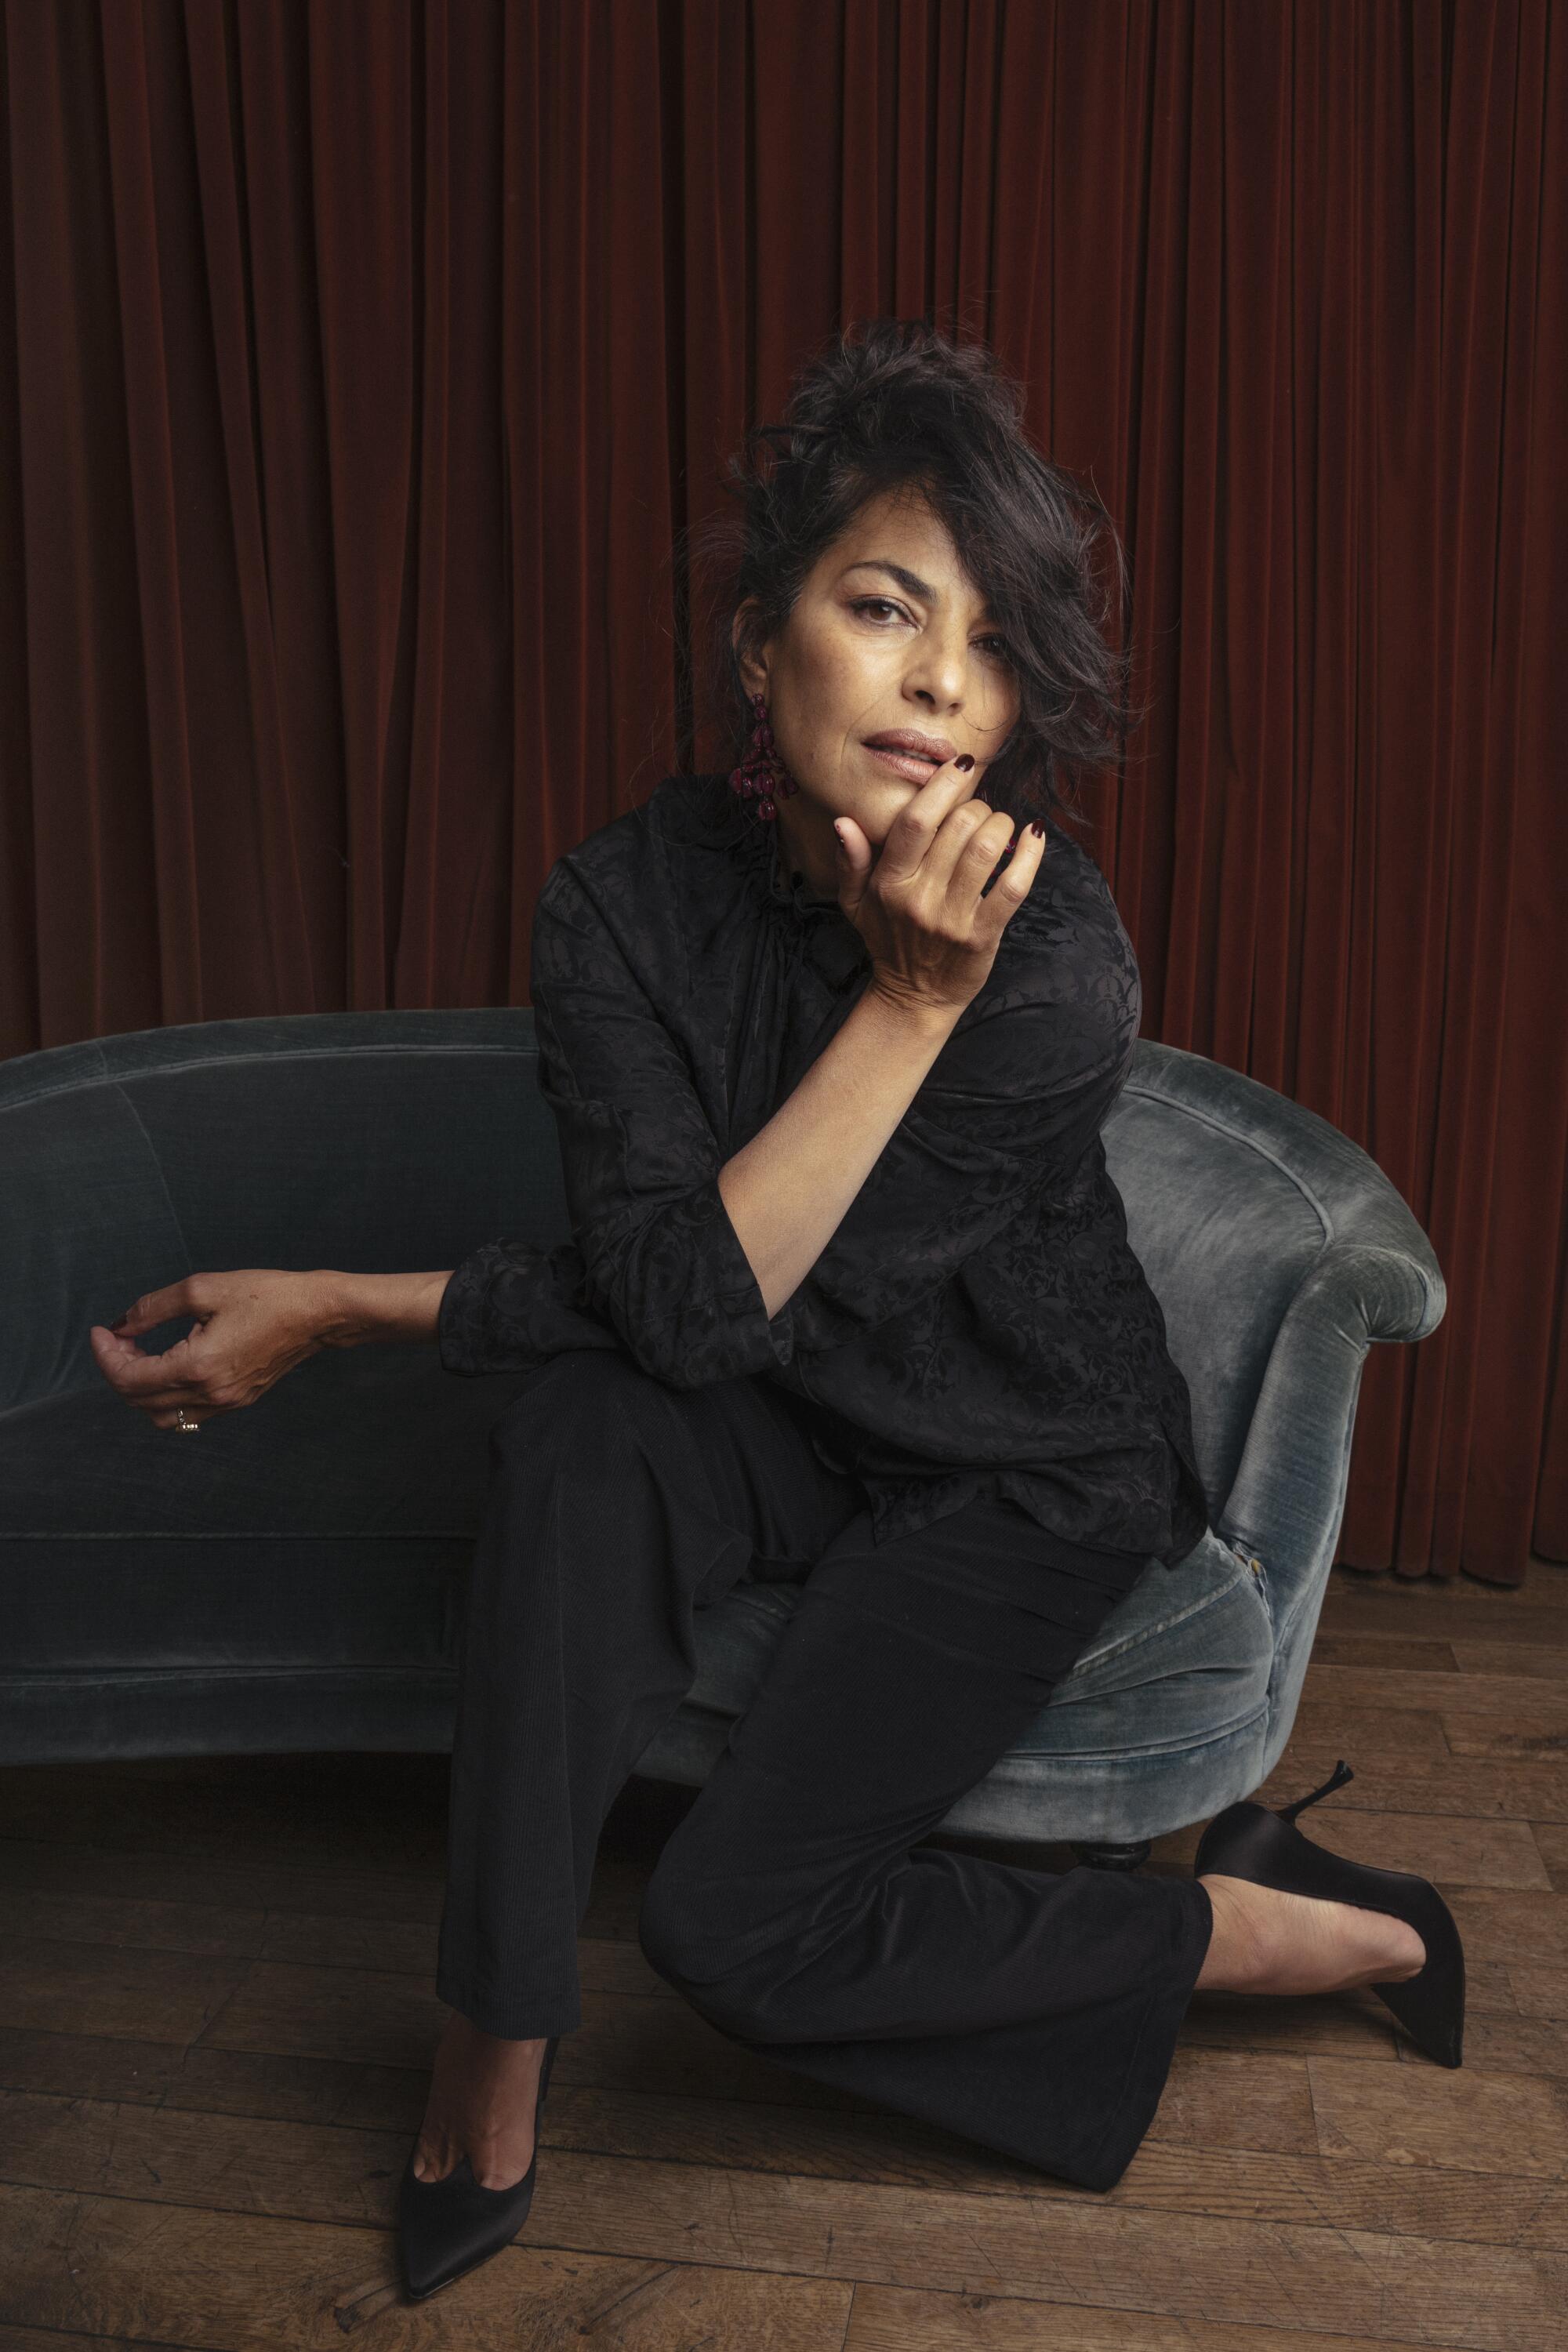 A woman in a black blouse, pants and heels poses on a small blue sofa